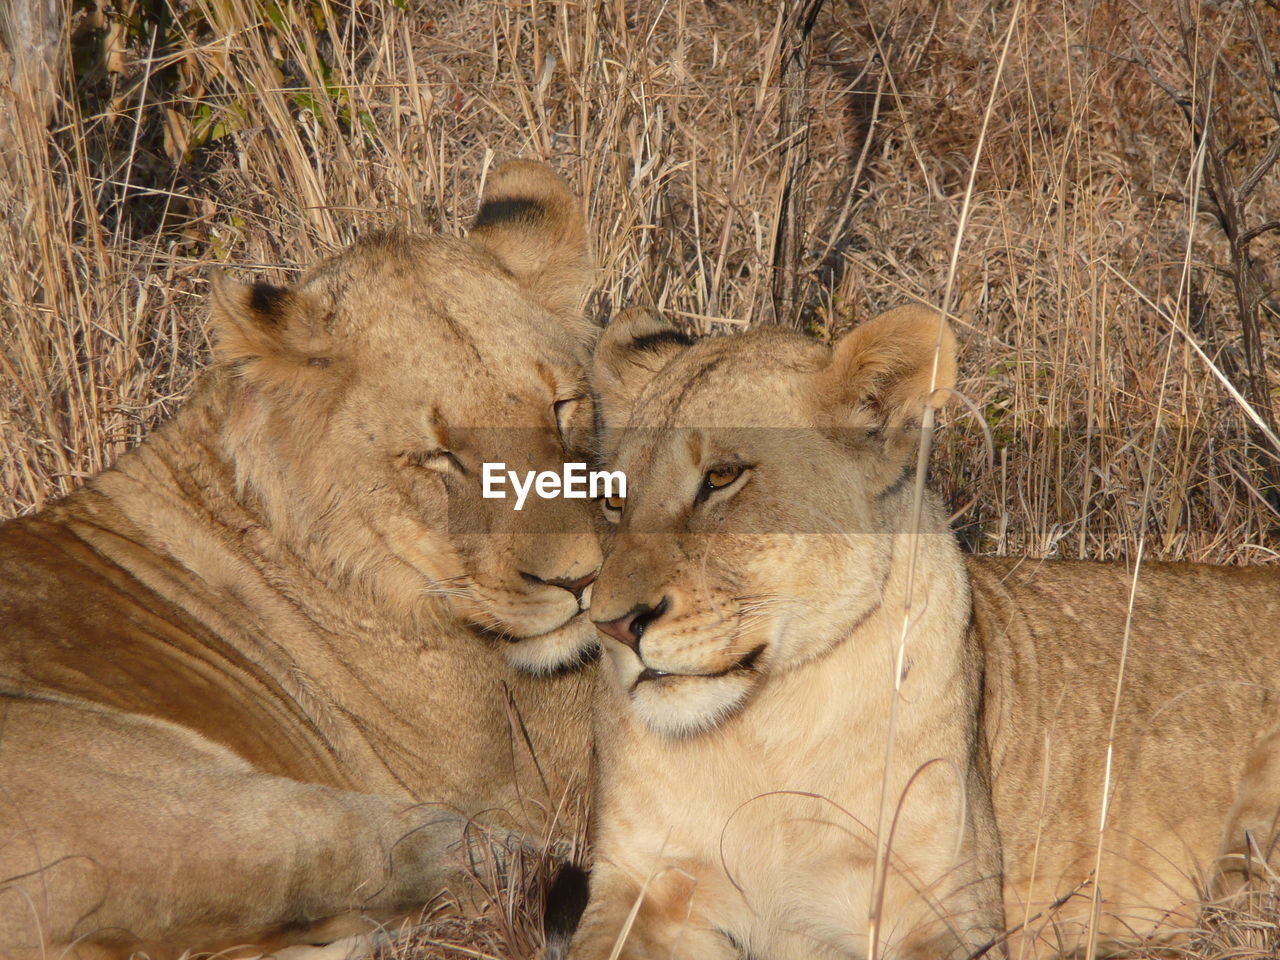 Lion and lioness caressing each other romantically. resting heads on each other.